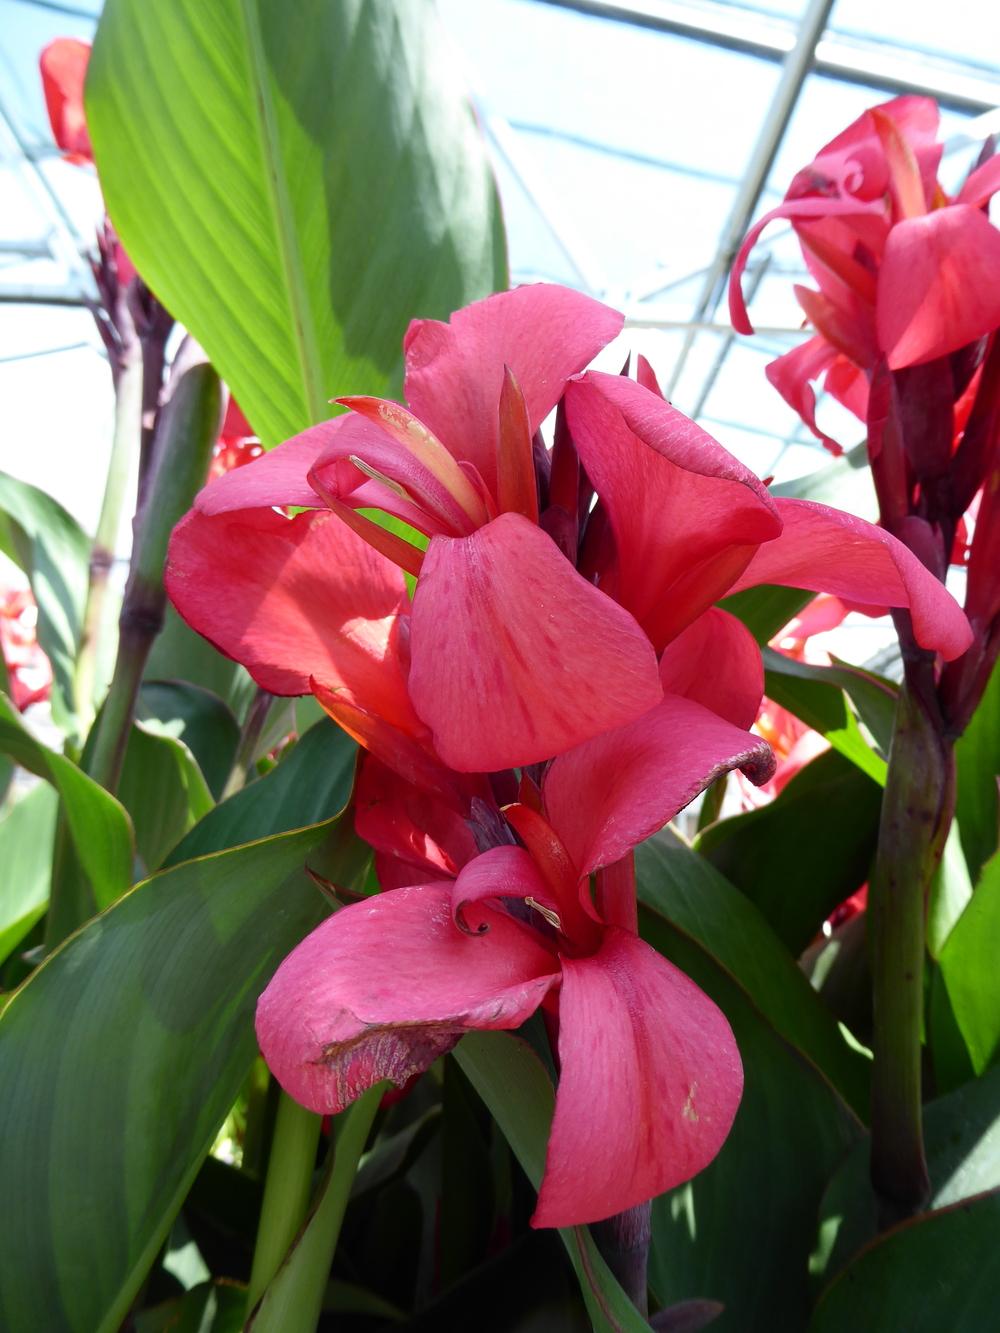 Photo of Cannas (Canna) uploaded by mellielong